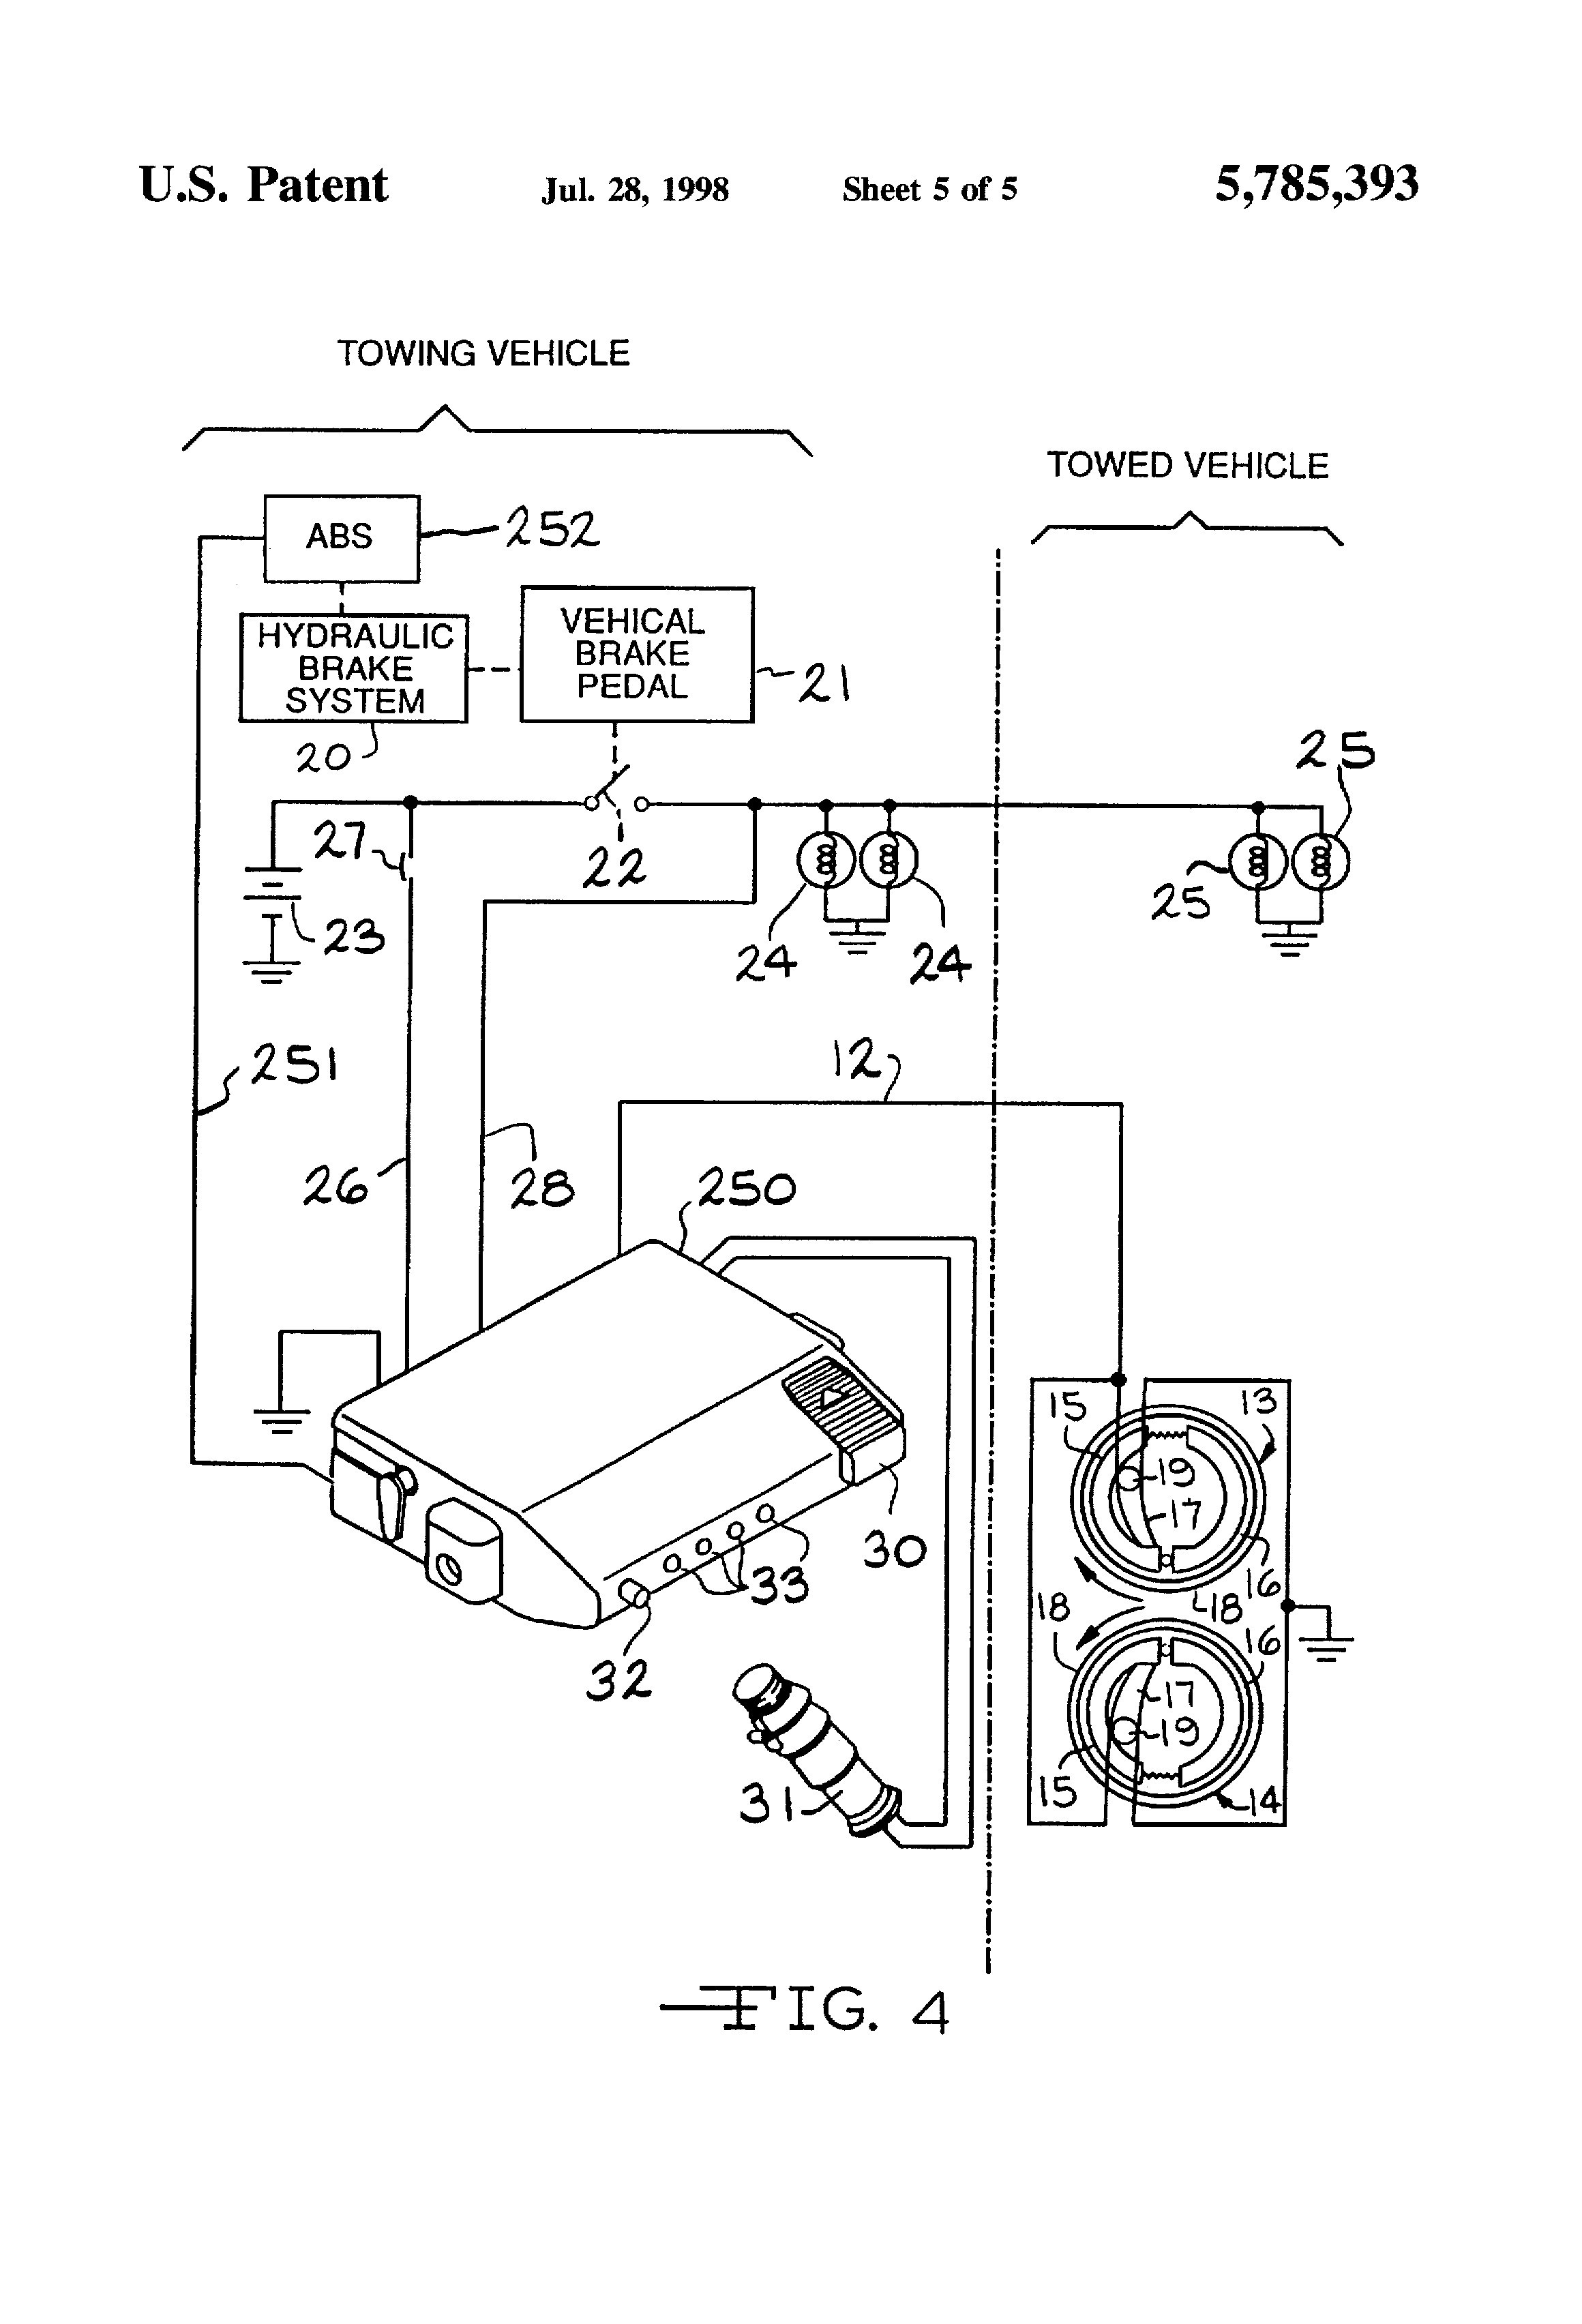 Wiring Diagram Trailer Brakes Save Wiring Diagram For Electric Brakes Trailers